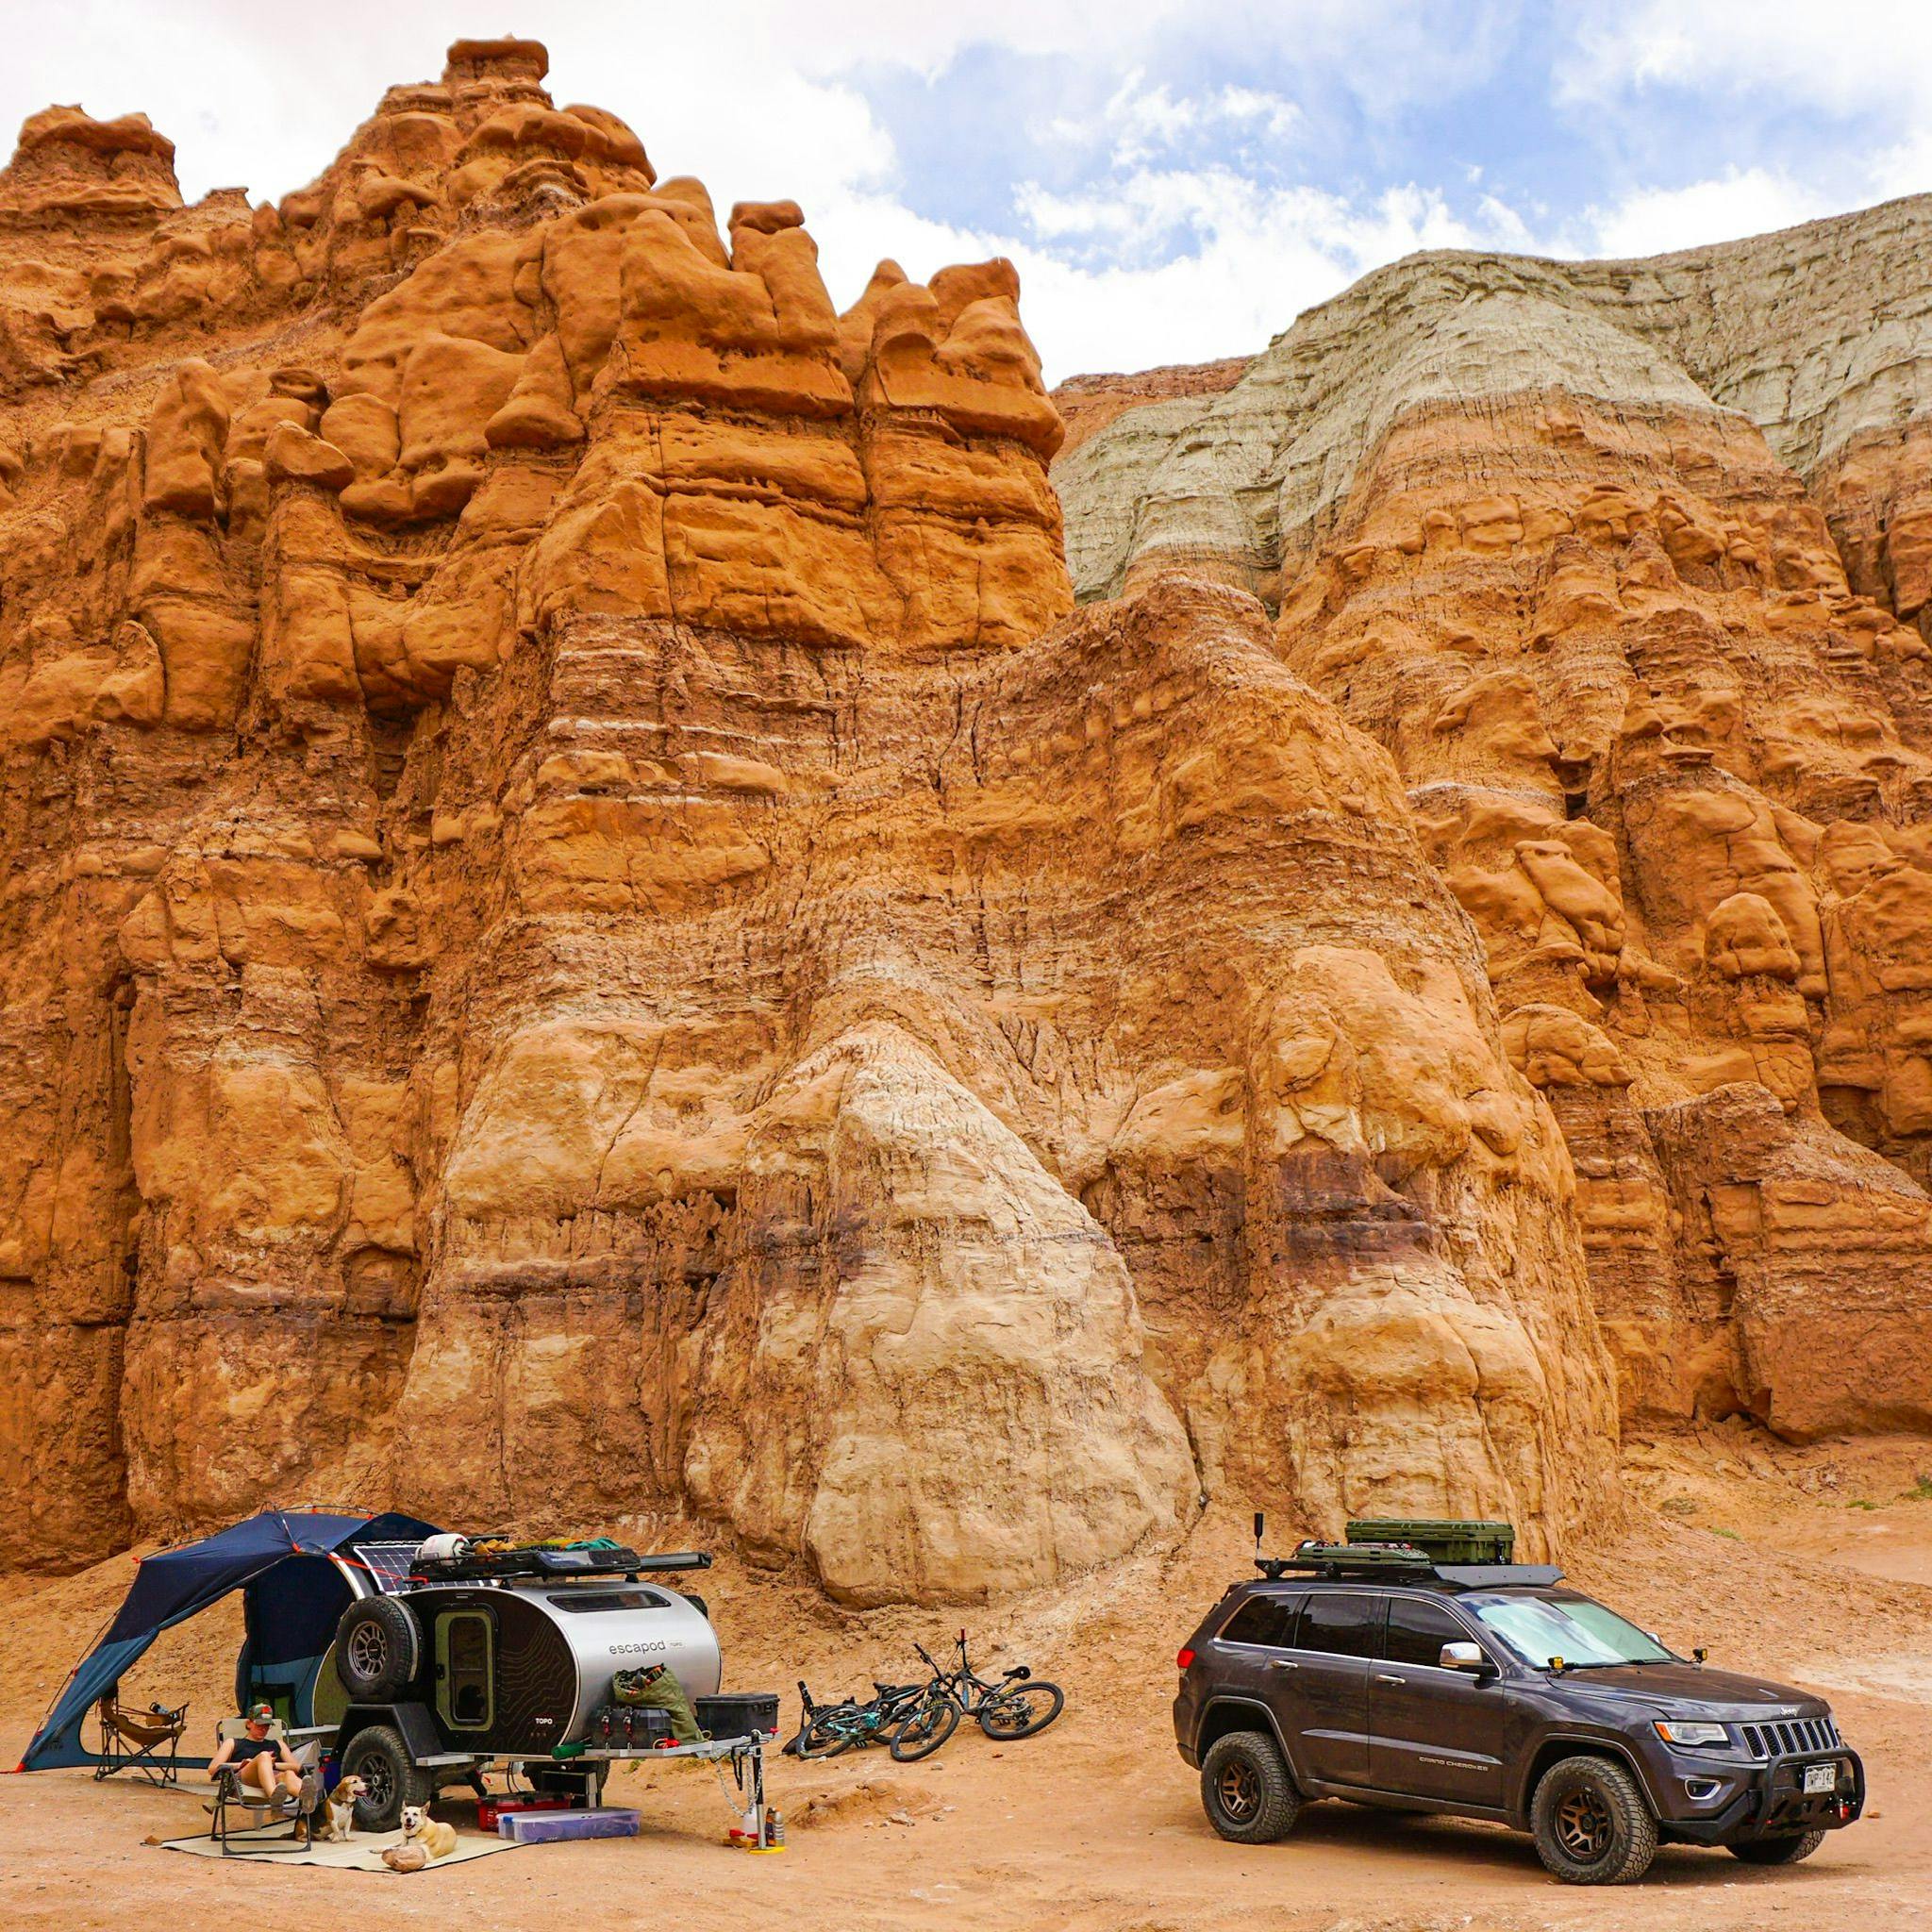 A Jeep towing an Escapod teardrop camper is nestled beneath glowing red rock in Goblin Valley, Utah.